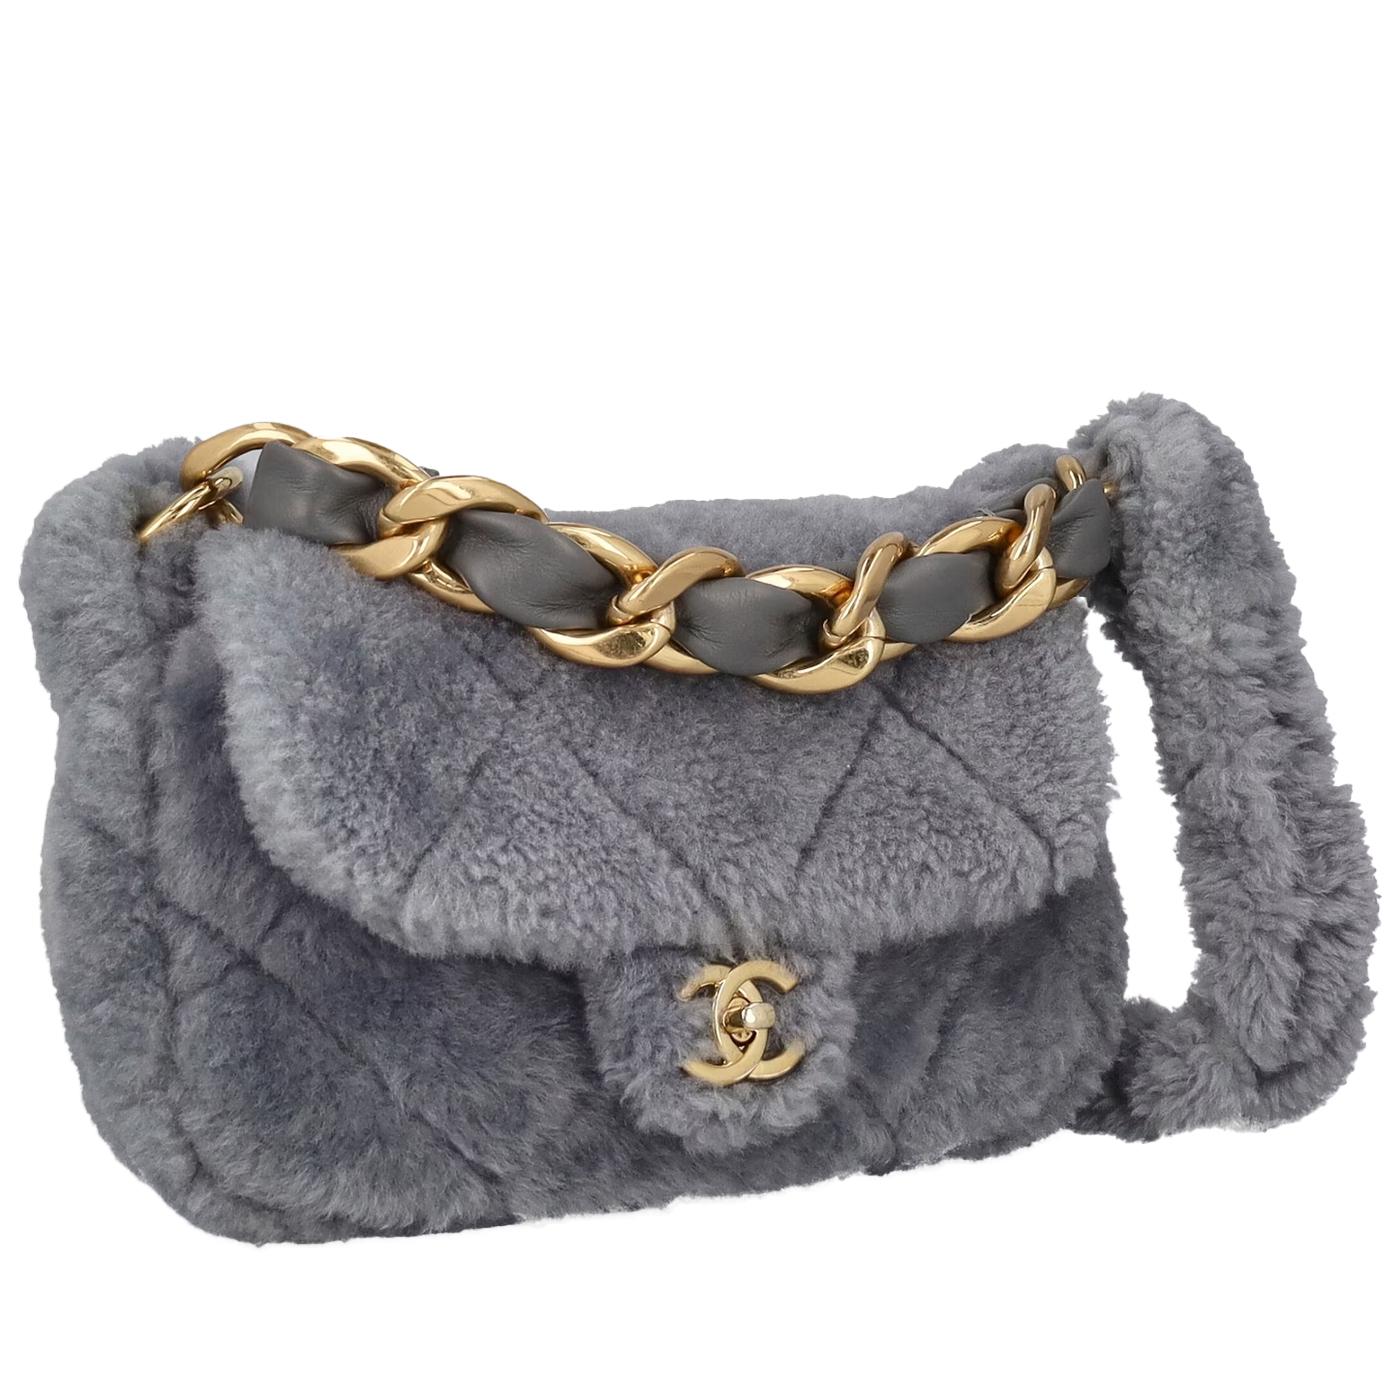 When you think of quilted leather, tweed two-pieces, and all-encompassing Parisian chic, there’s one brand that quickly comes to mind: Chanel. This Bag has synthetic fibers, a solid color, a front logo, a turn-lock closure, gold-tone hardware, an